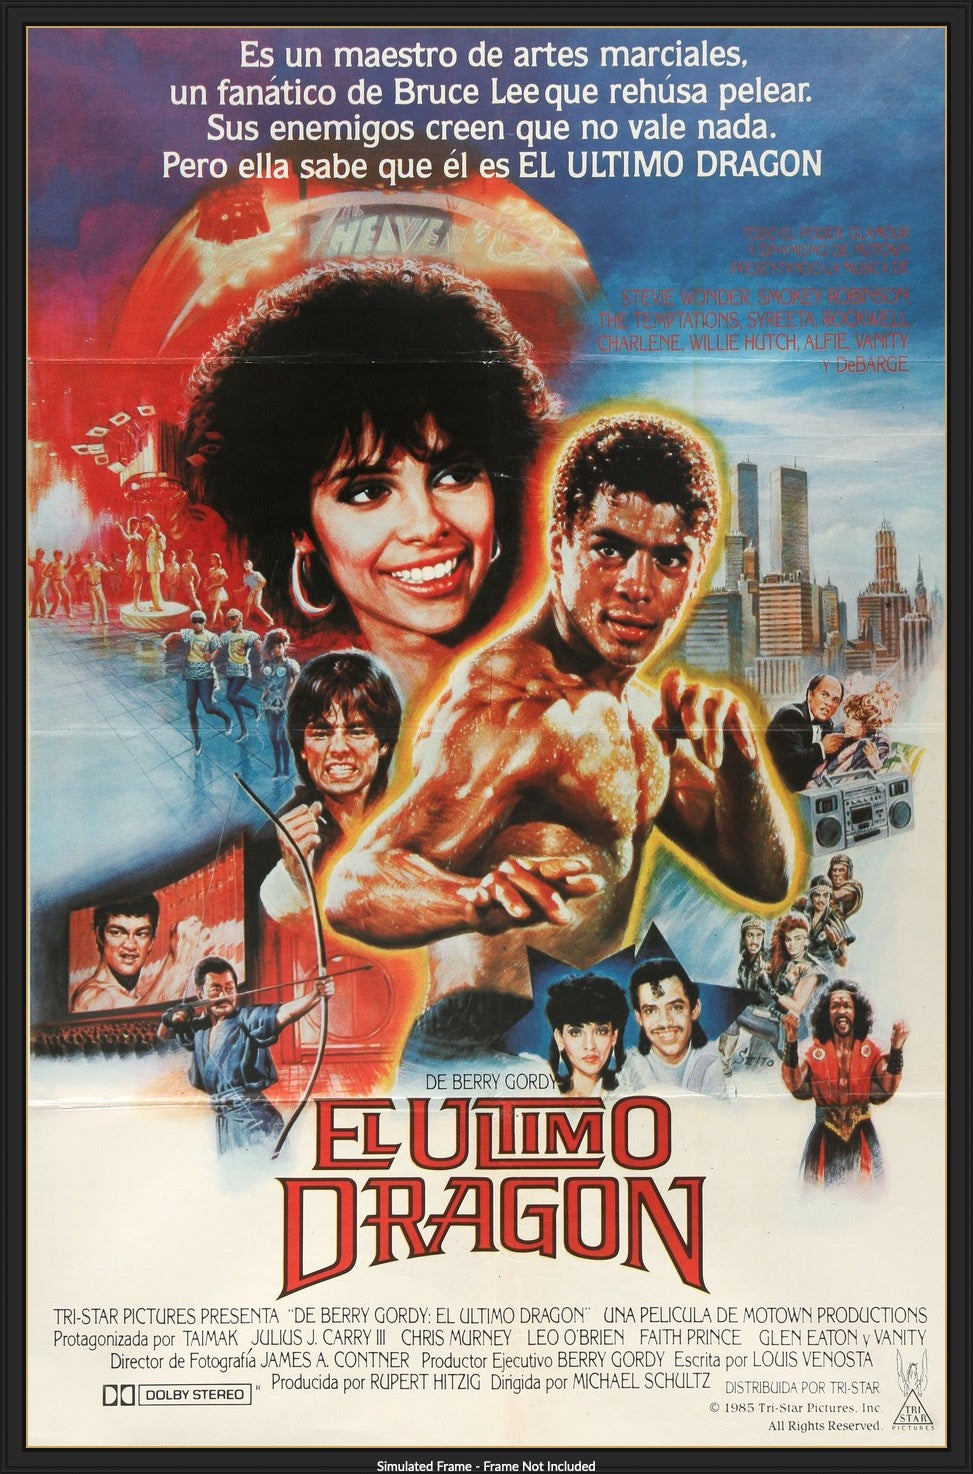 the last dragon poster